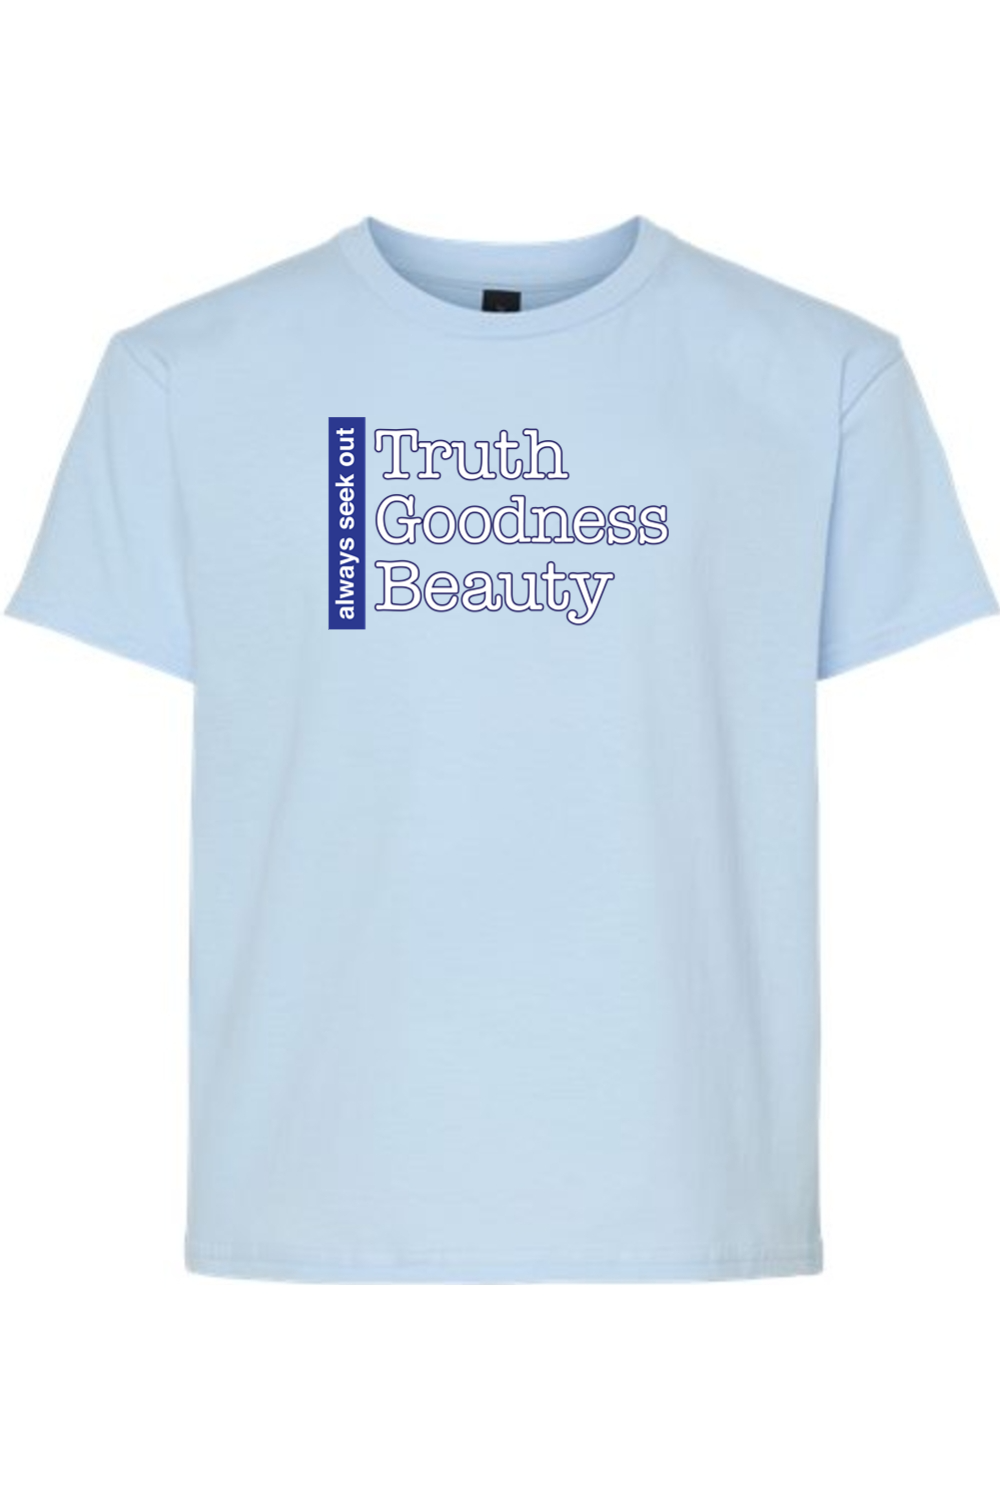 Truth Goodness Beauty - Transcendentals Youth T-Shirt